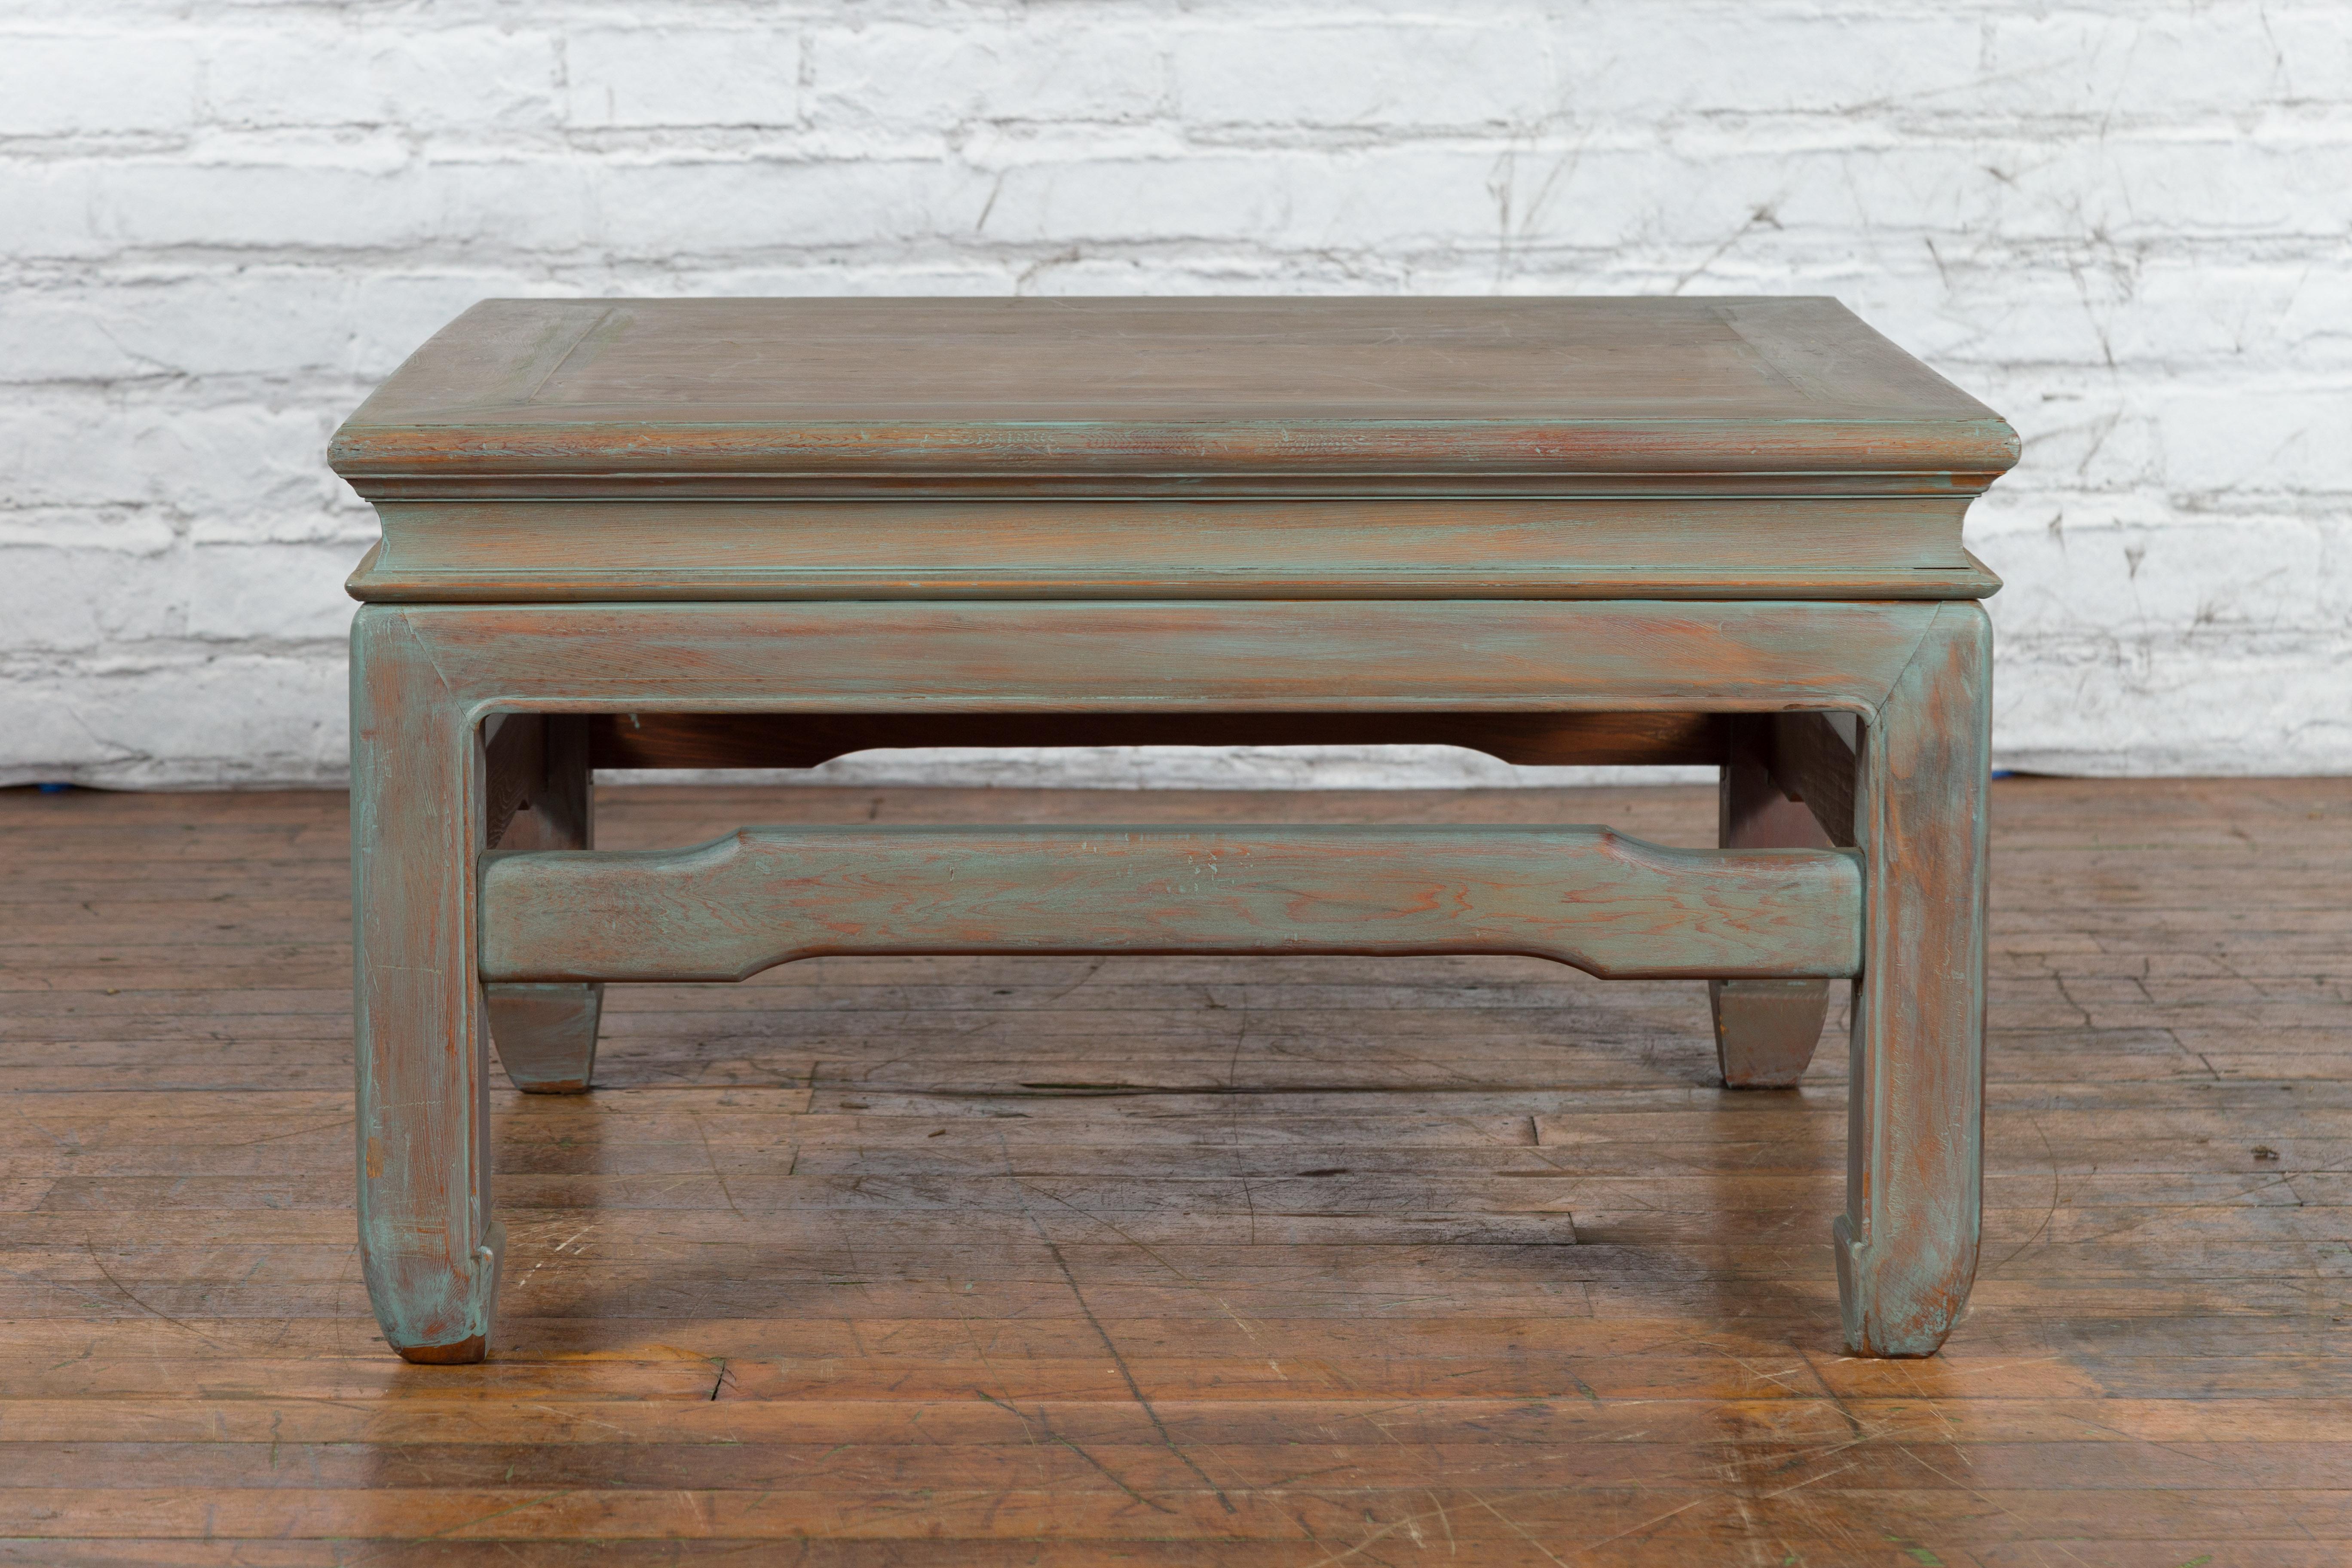 A vintage Thai blue washed teakwood waisted coffee table from the mid 20th century with hump back stretchers and horse hoof legs. Created in Thailand during the Midcentury period, this vintage teakwood coffee table features a blue washed finish